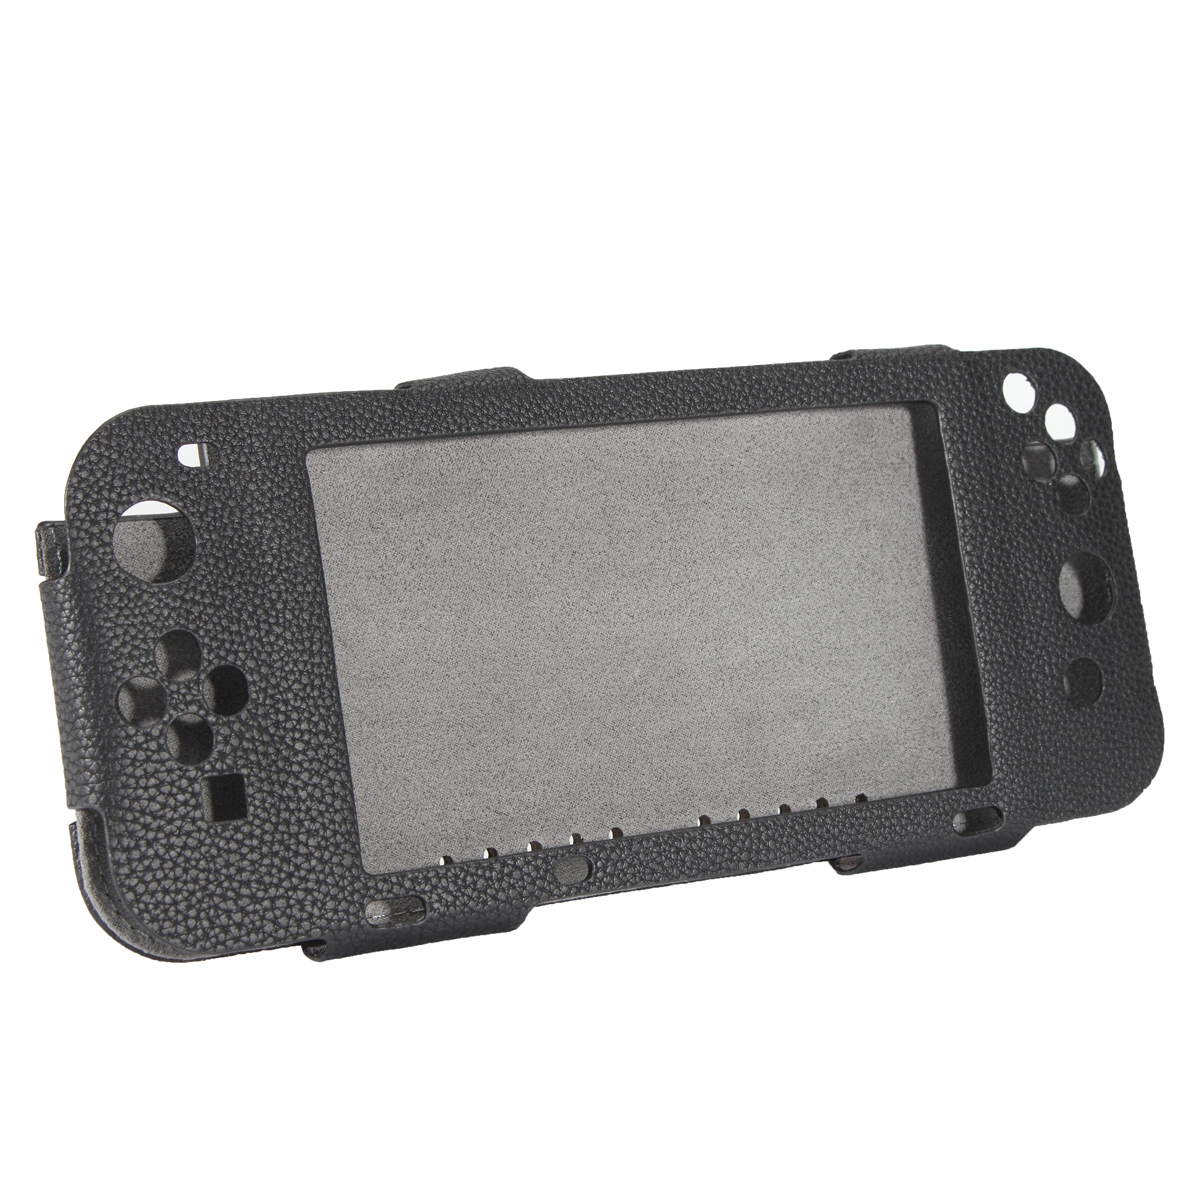 Leather-Protective-Case-Cover-Protecor-for-Nintendo-Switch-Game-Console-1540488-5